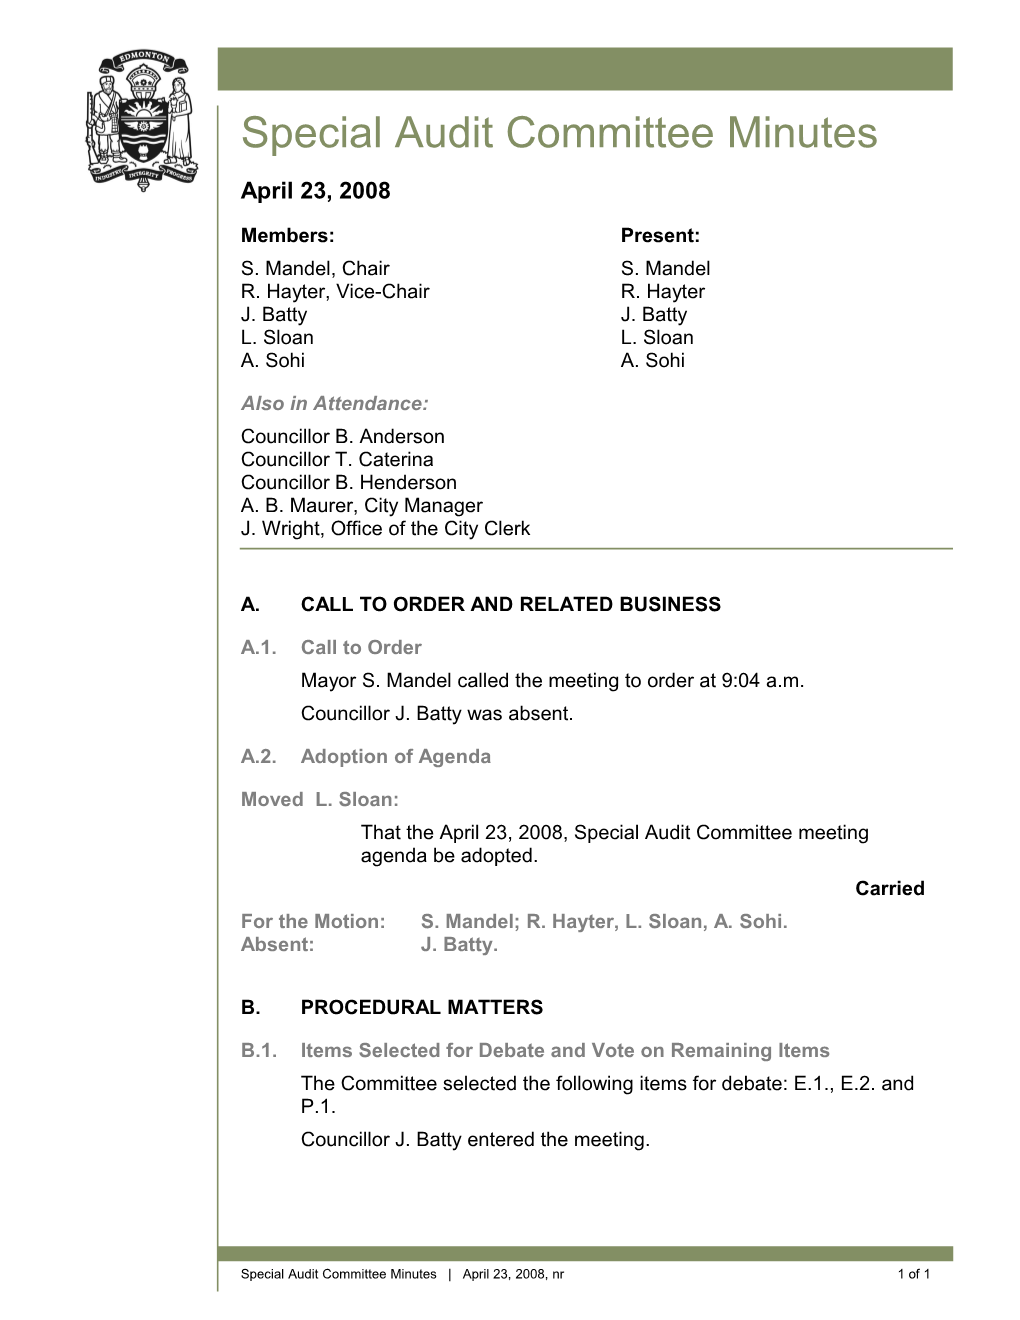 Minutes for Audit Committee April 23, 2008 Meeting